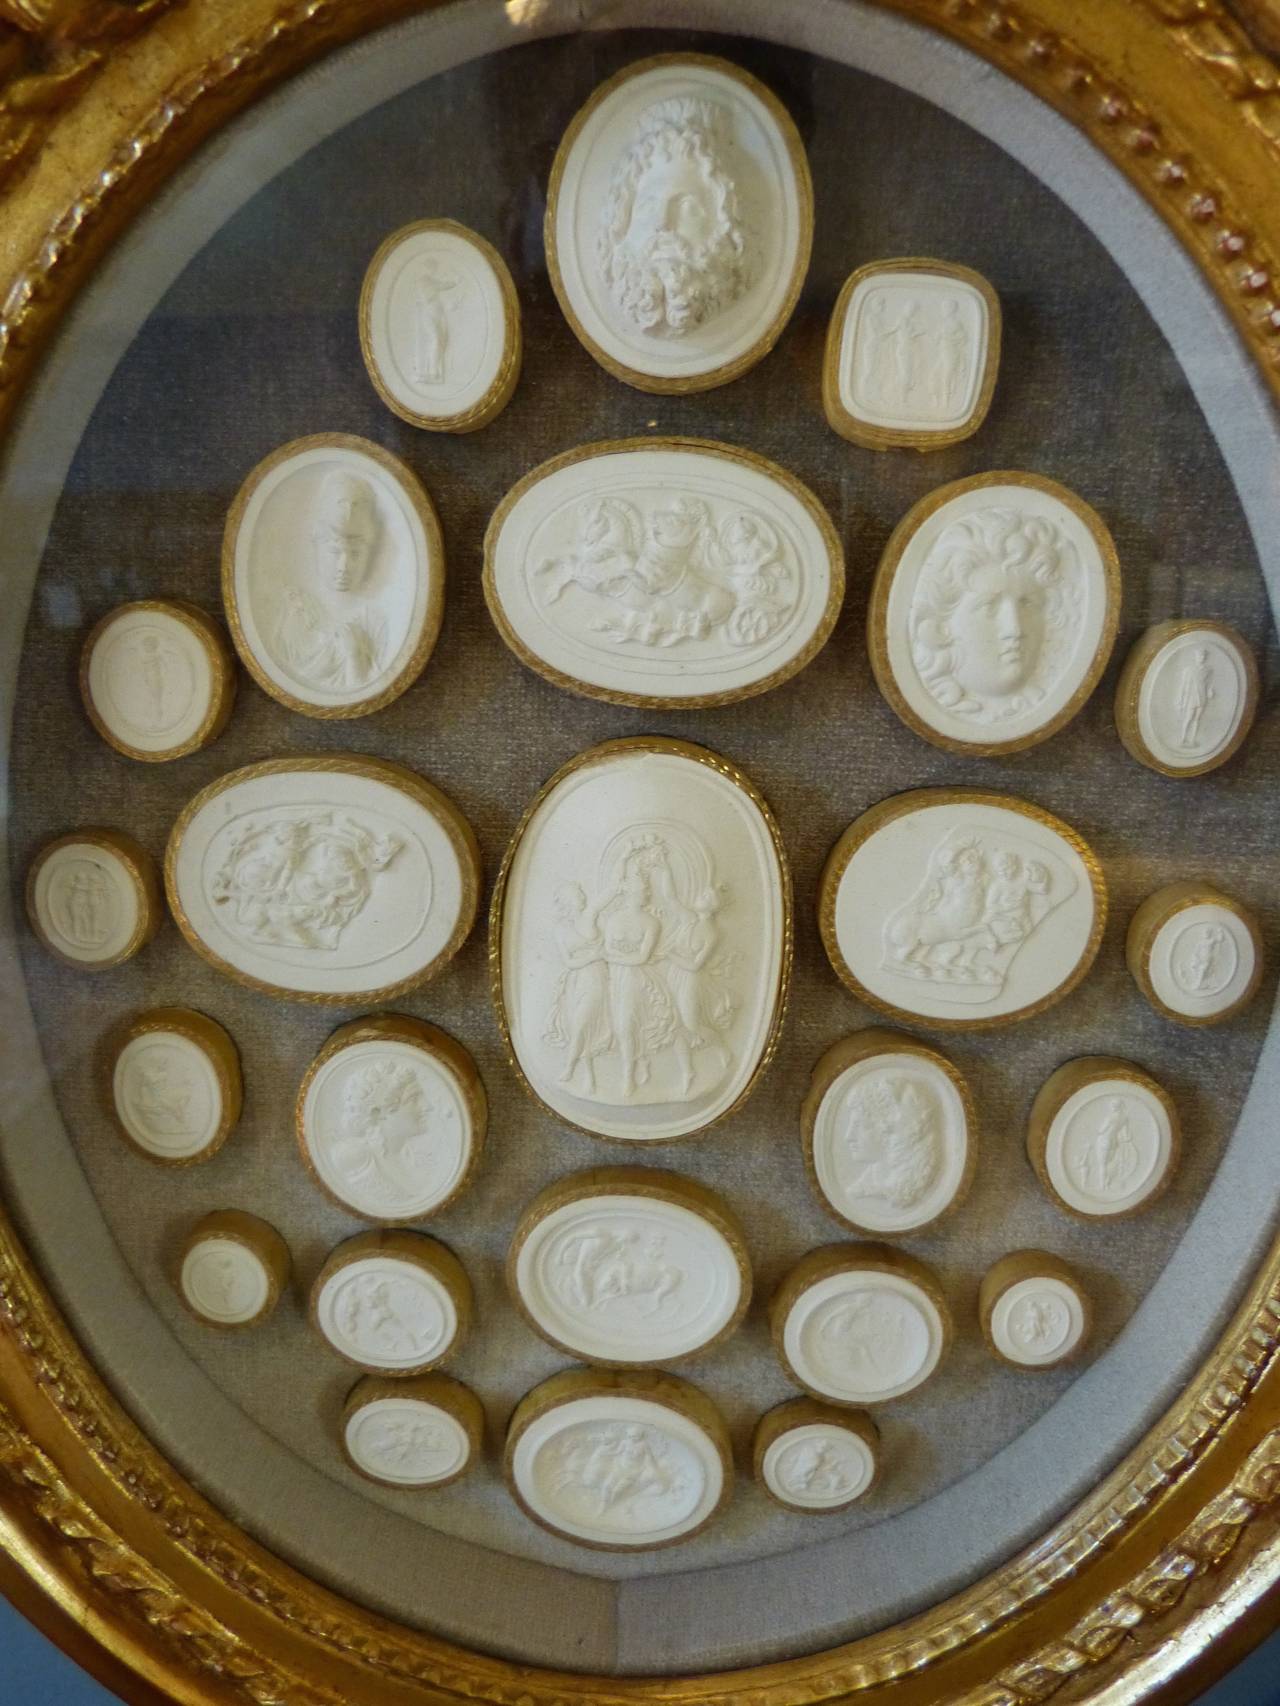 A rare set of 12 Italian 19th century oval giltwood frames with over 200 carved plaster cameos (intaglios), each surrounded by either gilt or ebonized frames. All in the subject matter in the neoclassic taste depicting Roman and Greek mythology